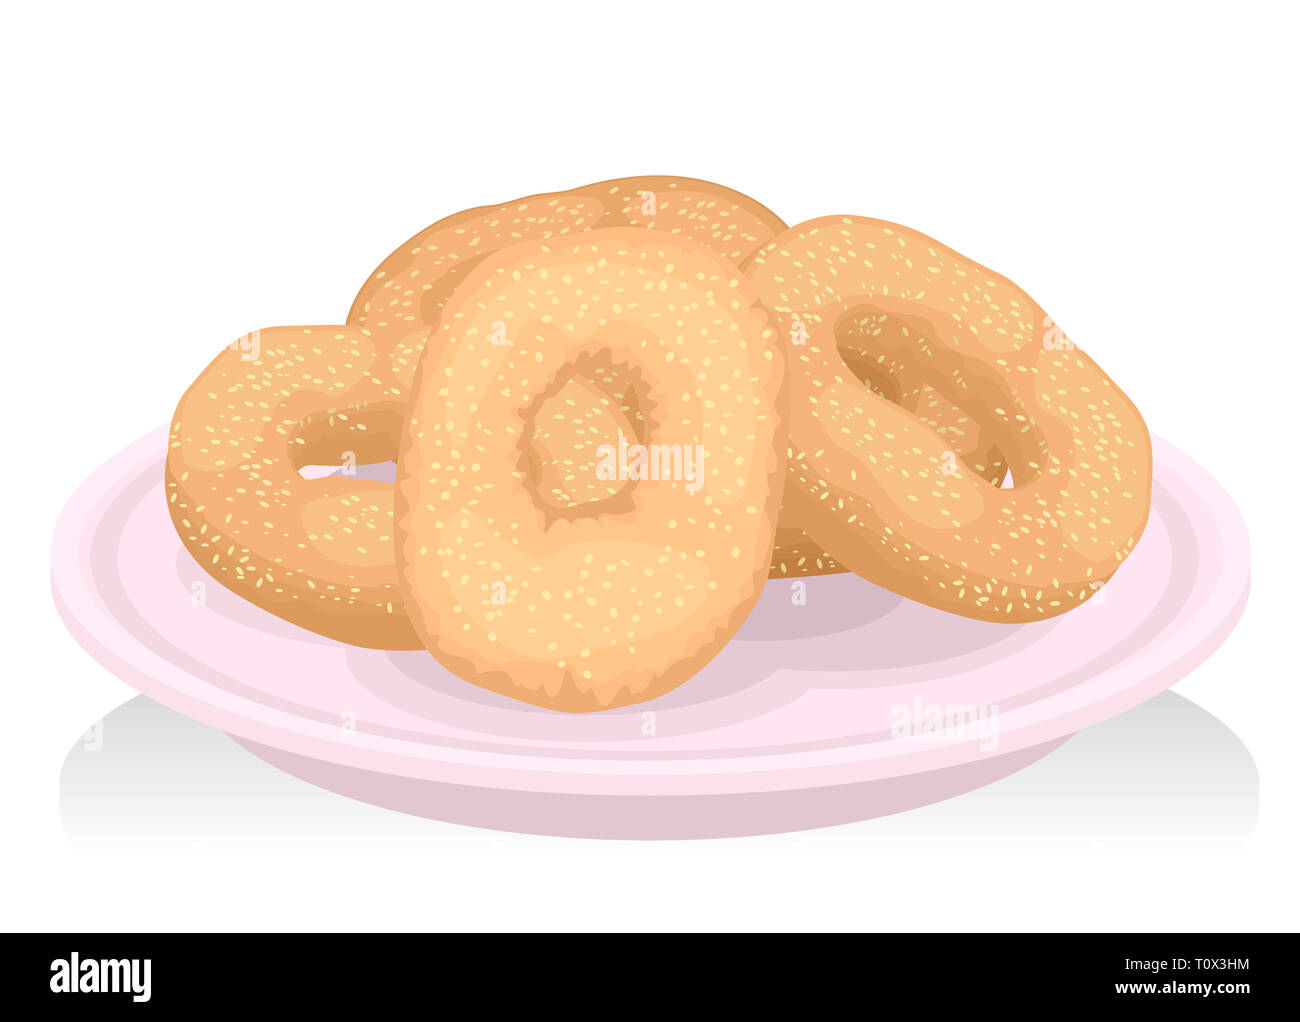 Illustration of Montreal Style Bagels on Plate Stock Photo